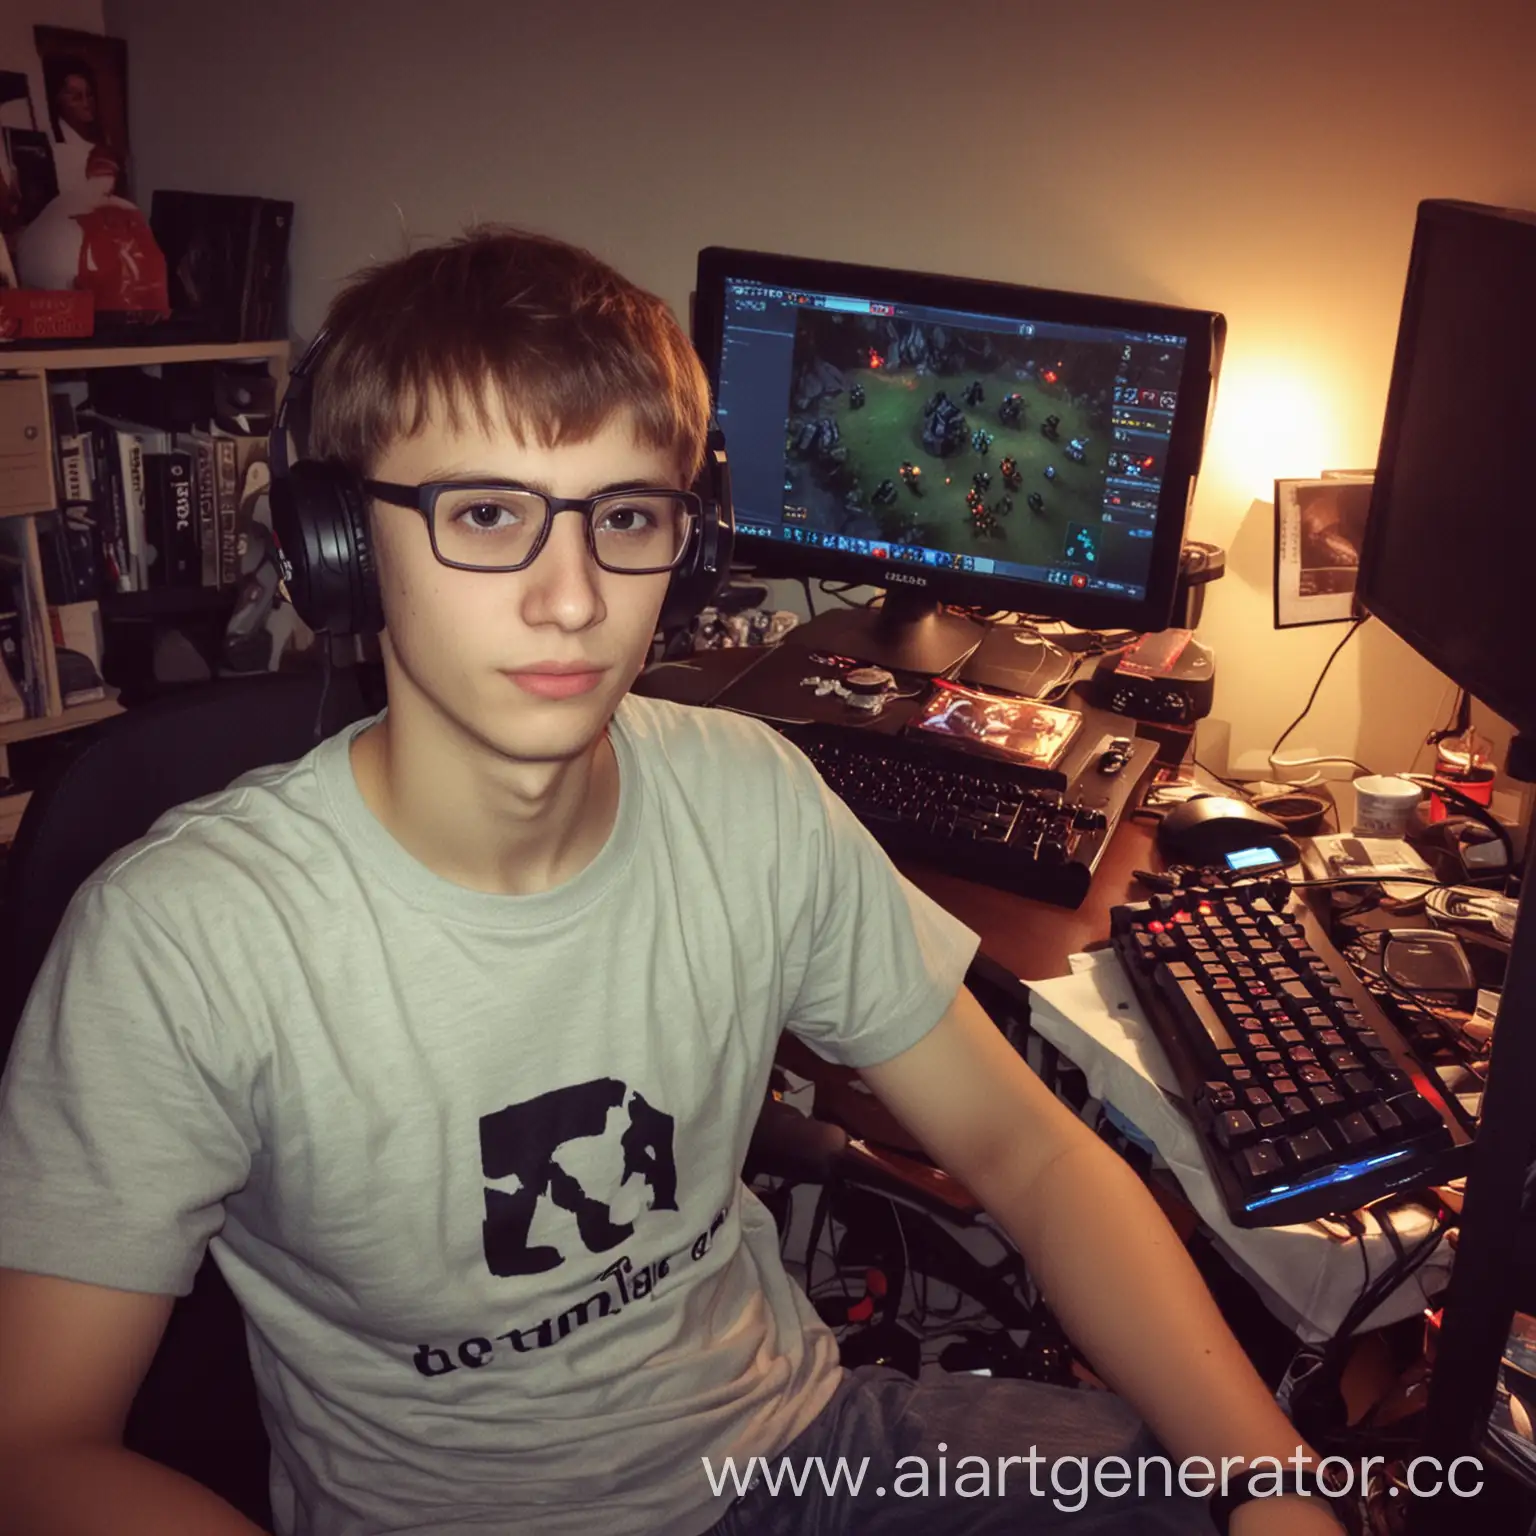 Denis-Relaxing-with-Dota-After-a-Long-Day-of-Work